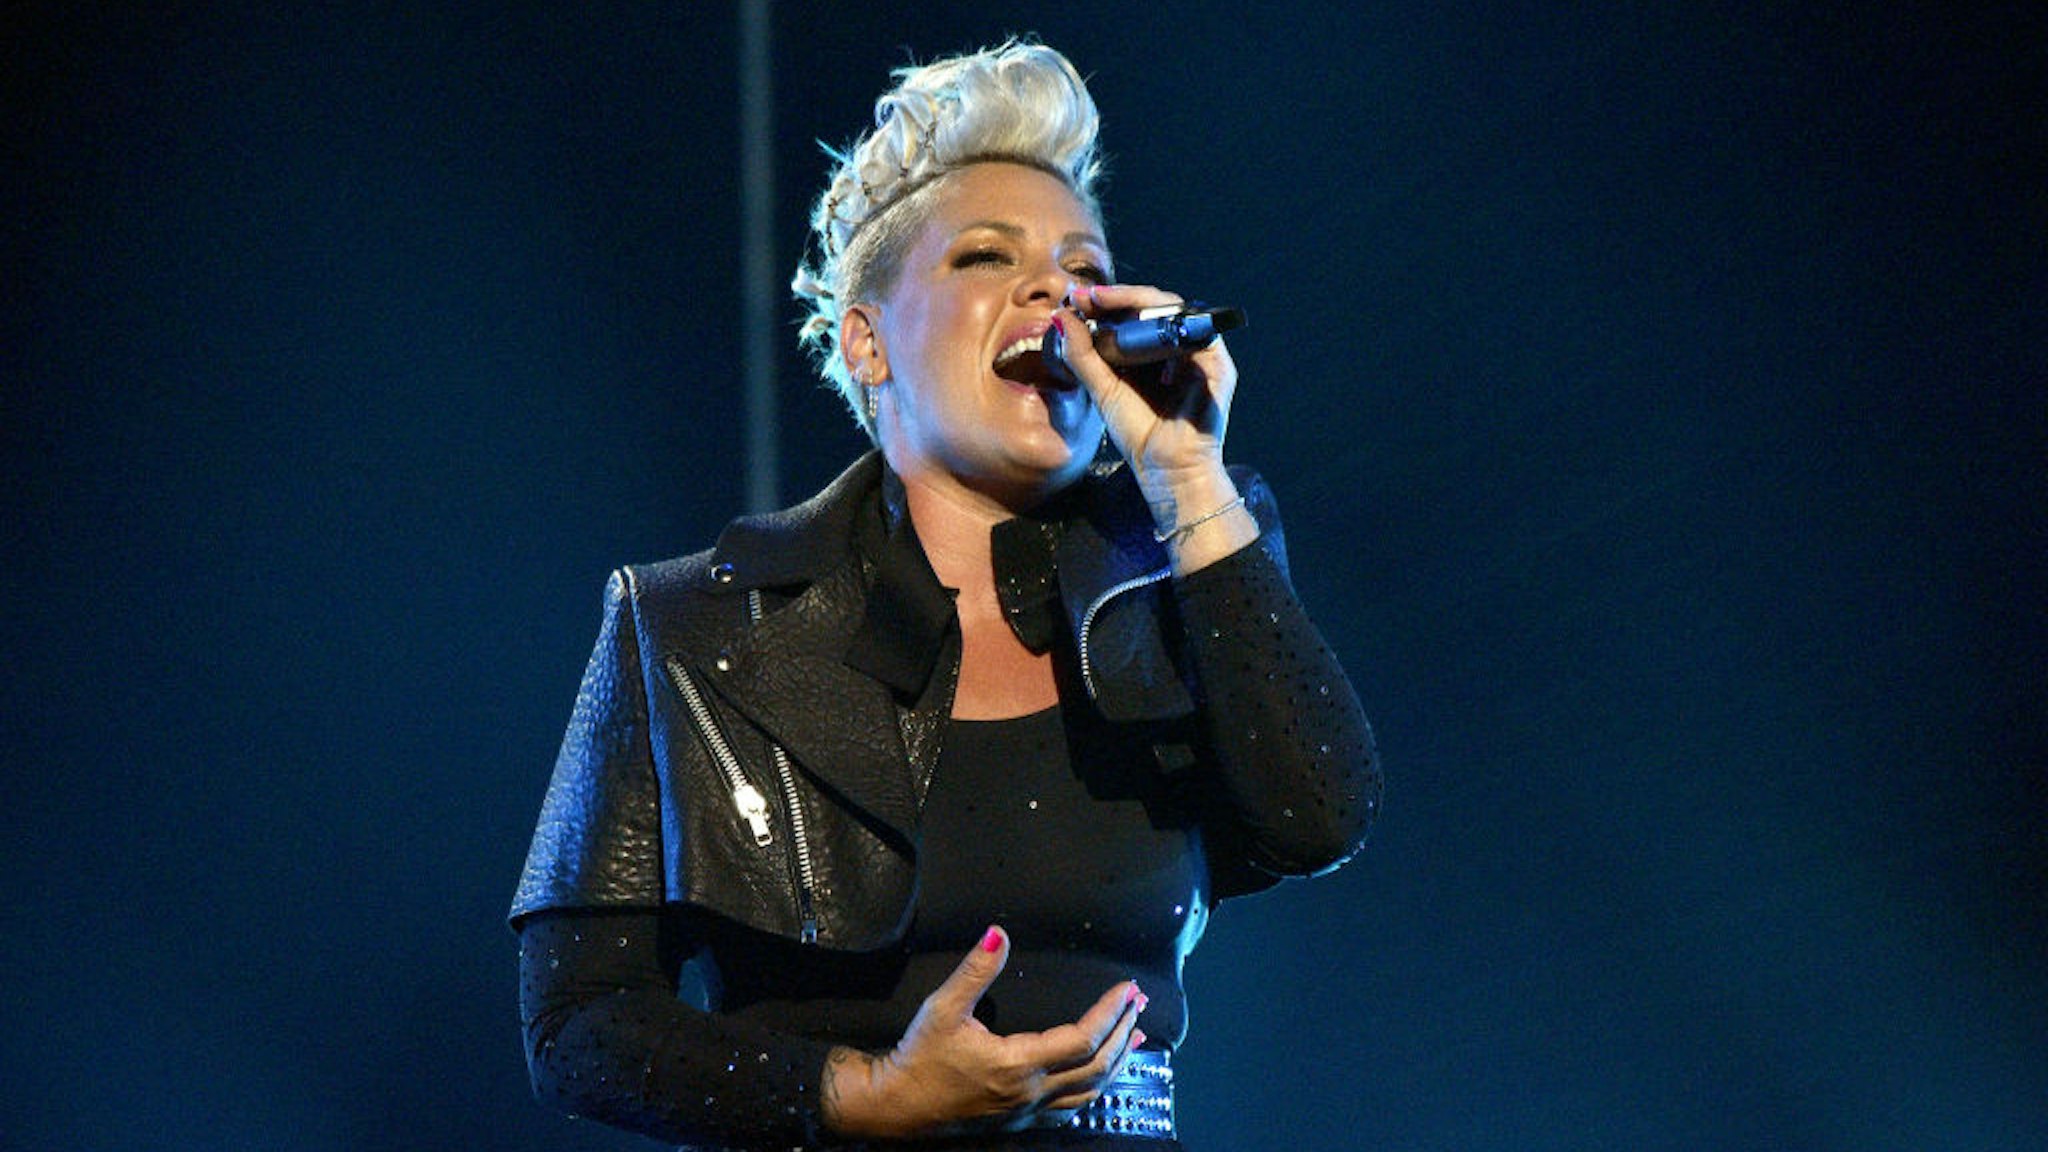 In this image released on May 23, P!nk performs onstage for the 2021 Billboard Music Awards, broadcast on May 23, 2021 at Microsoft Theater in Los Angeles, California.